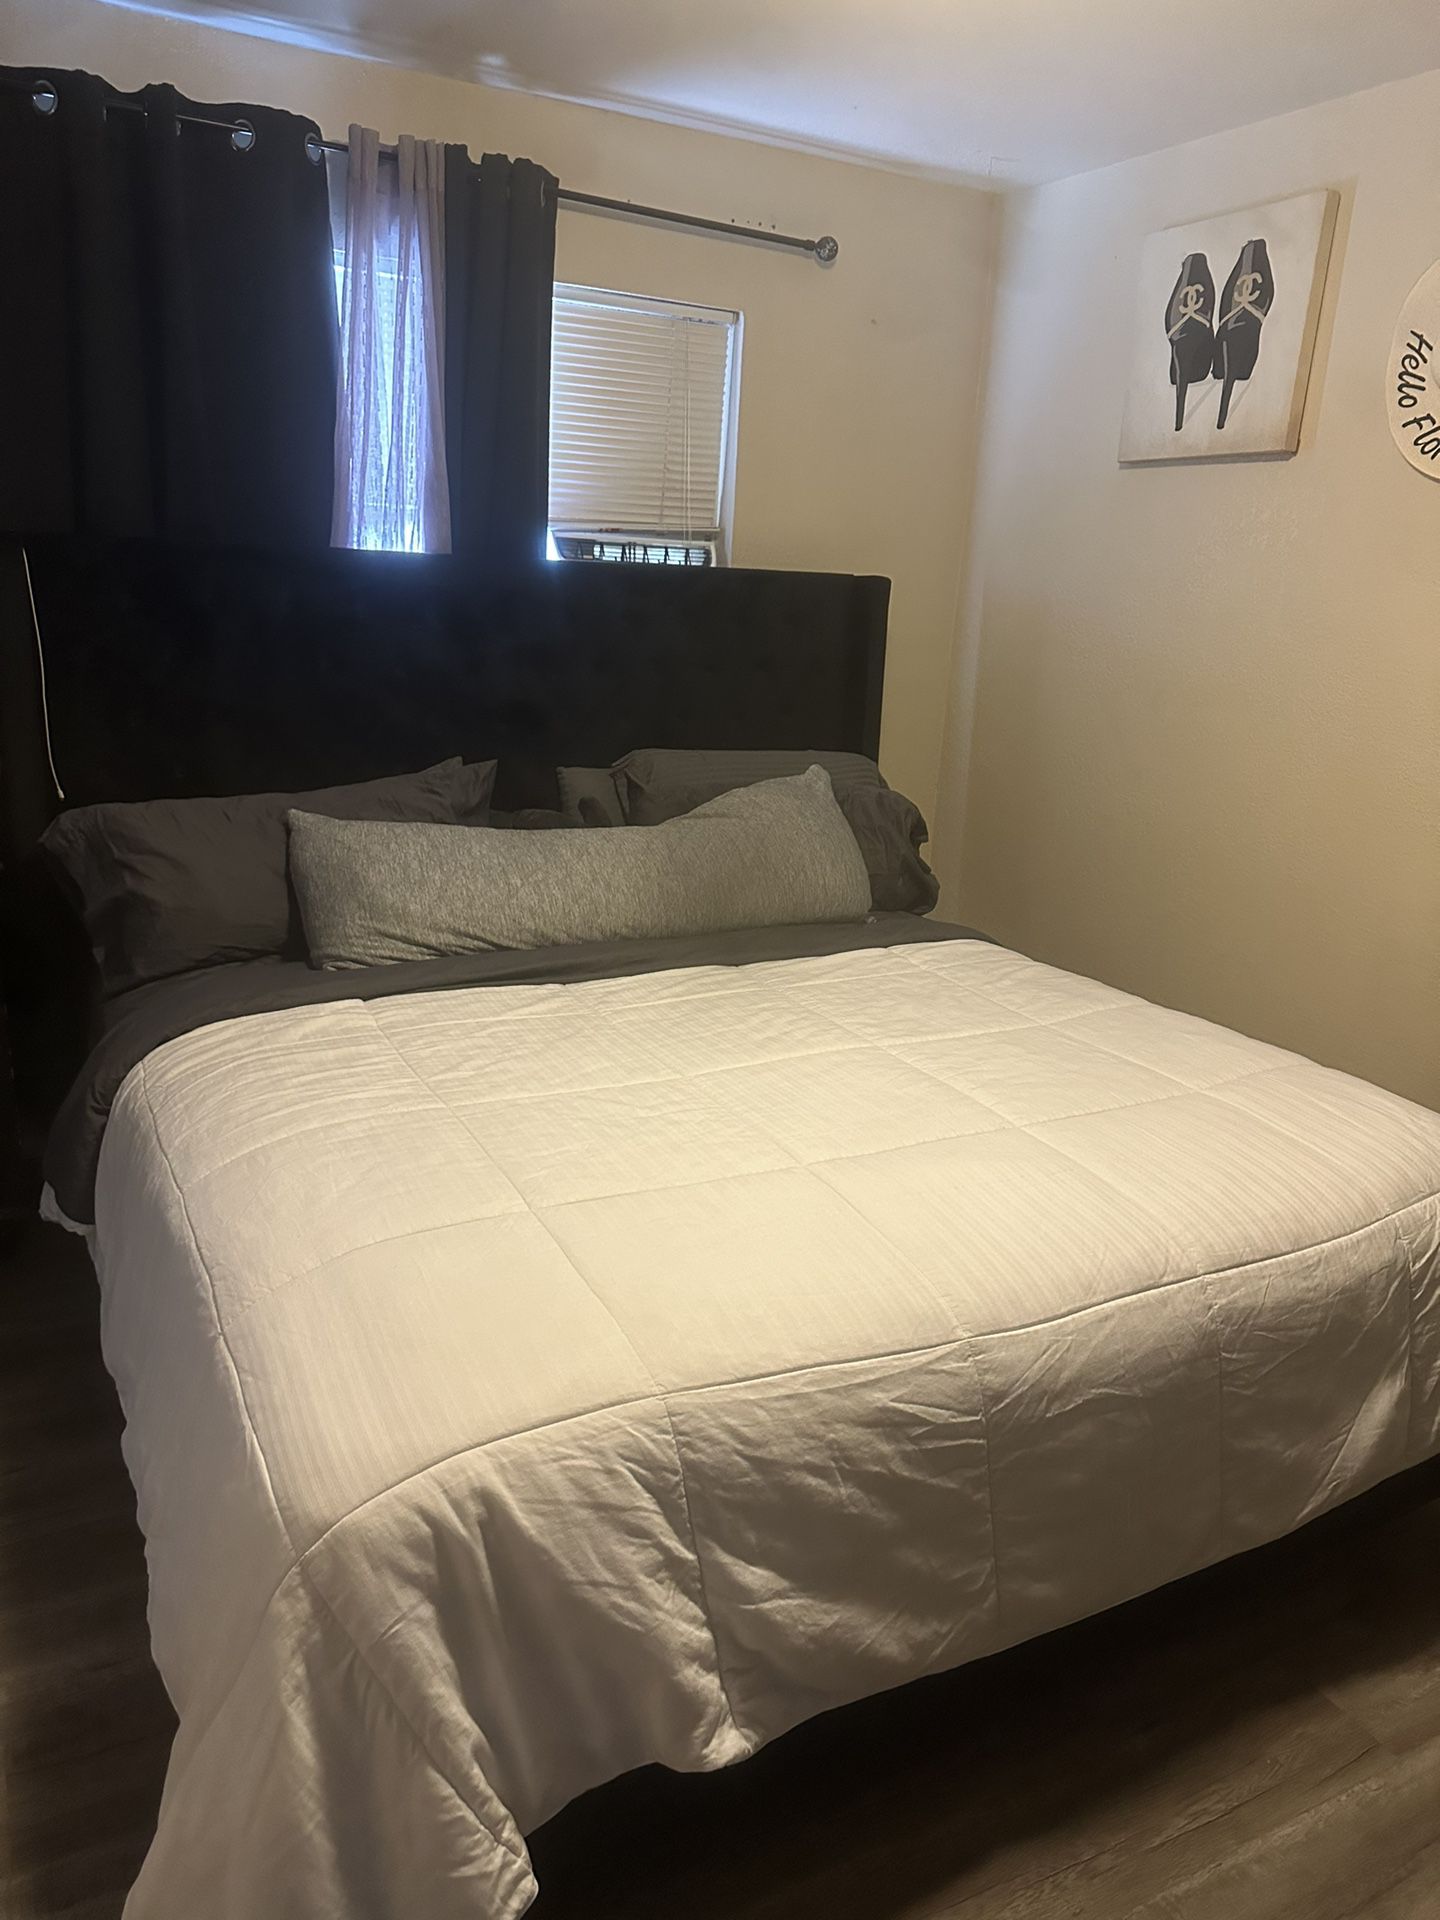 King Size Bed With Frame 